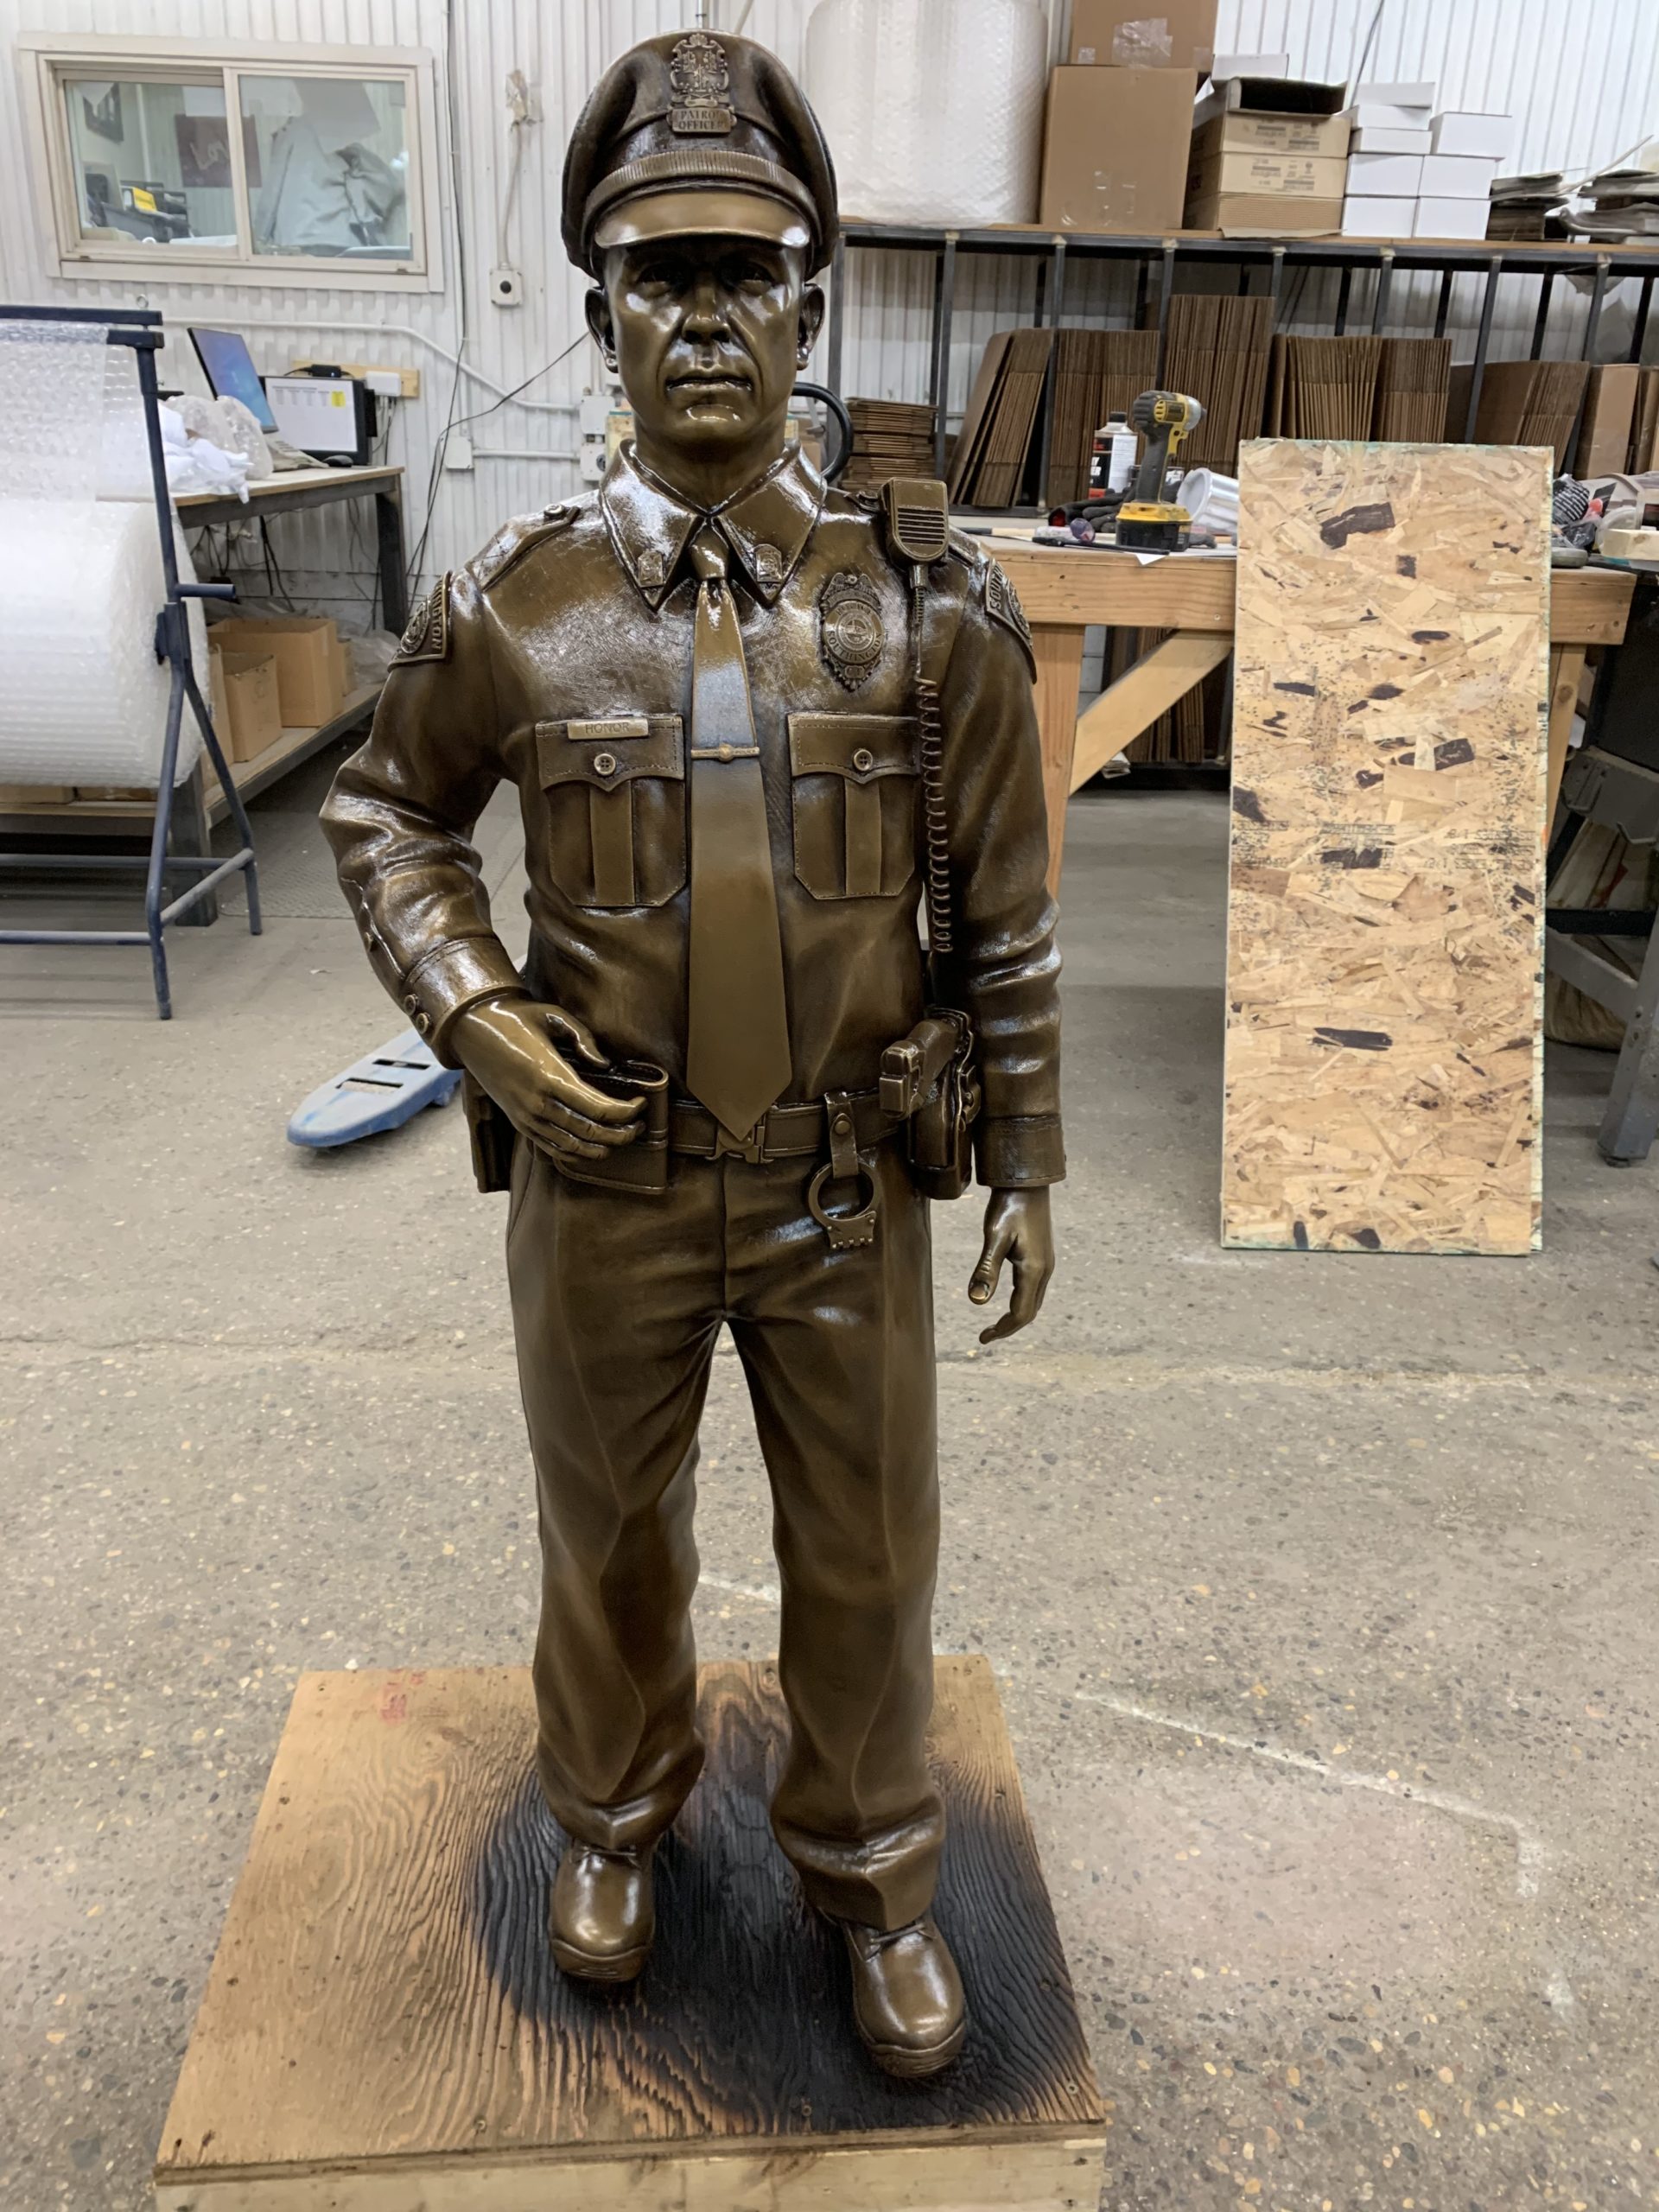 police officer bronze statue in the making